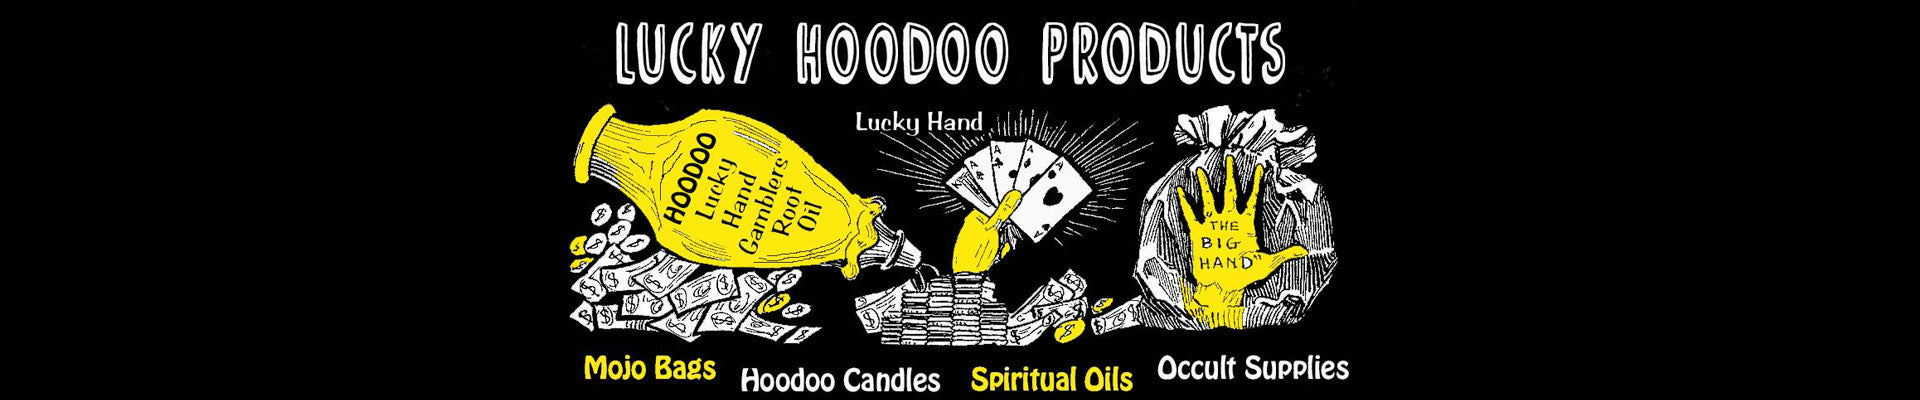 Lucky Hoodoo Products